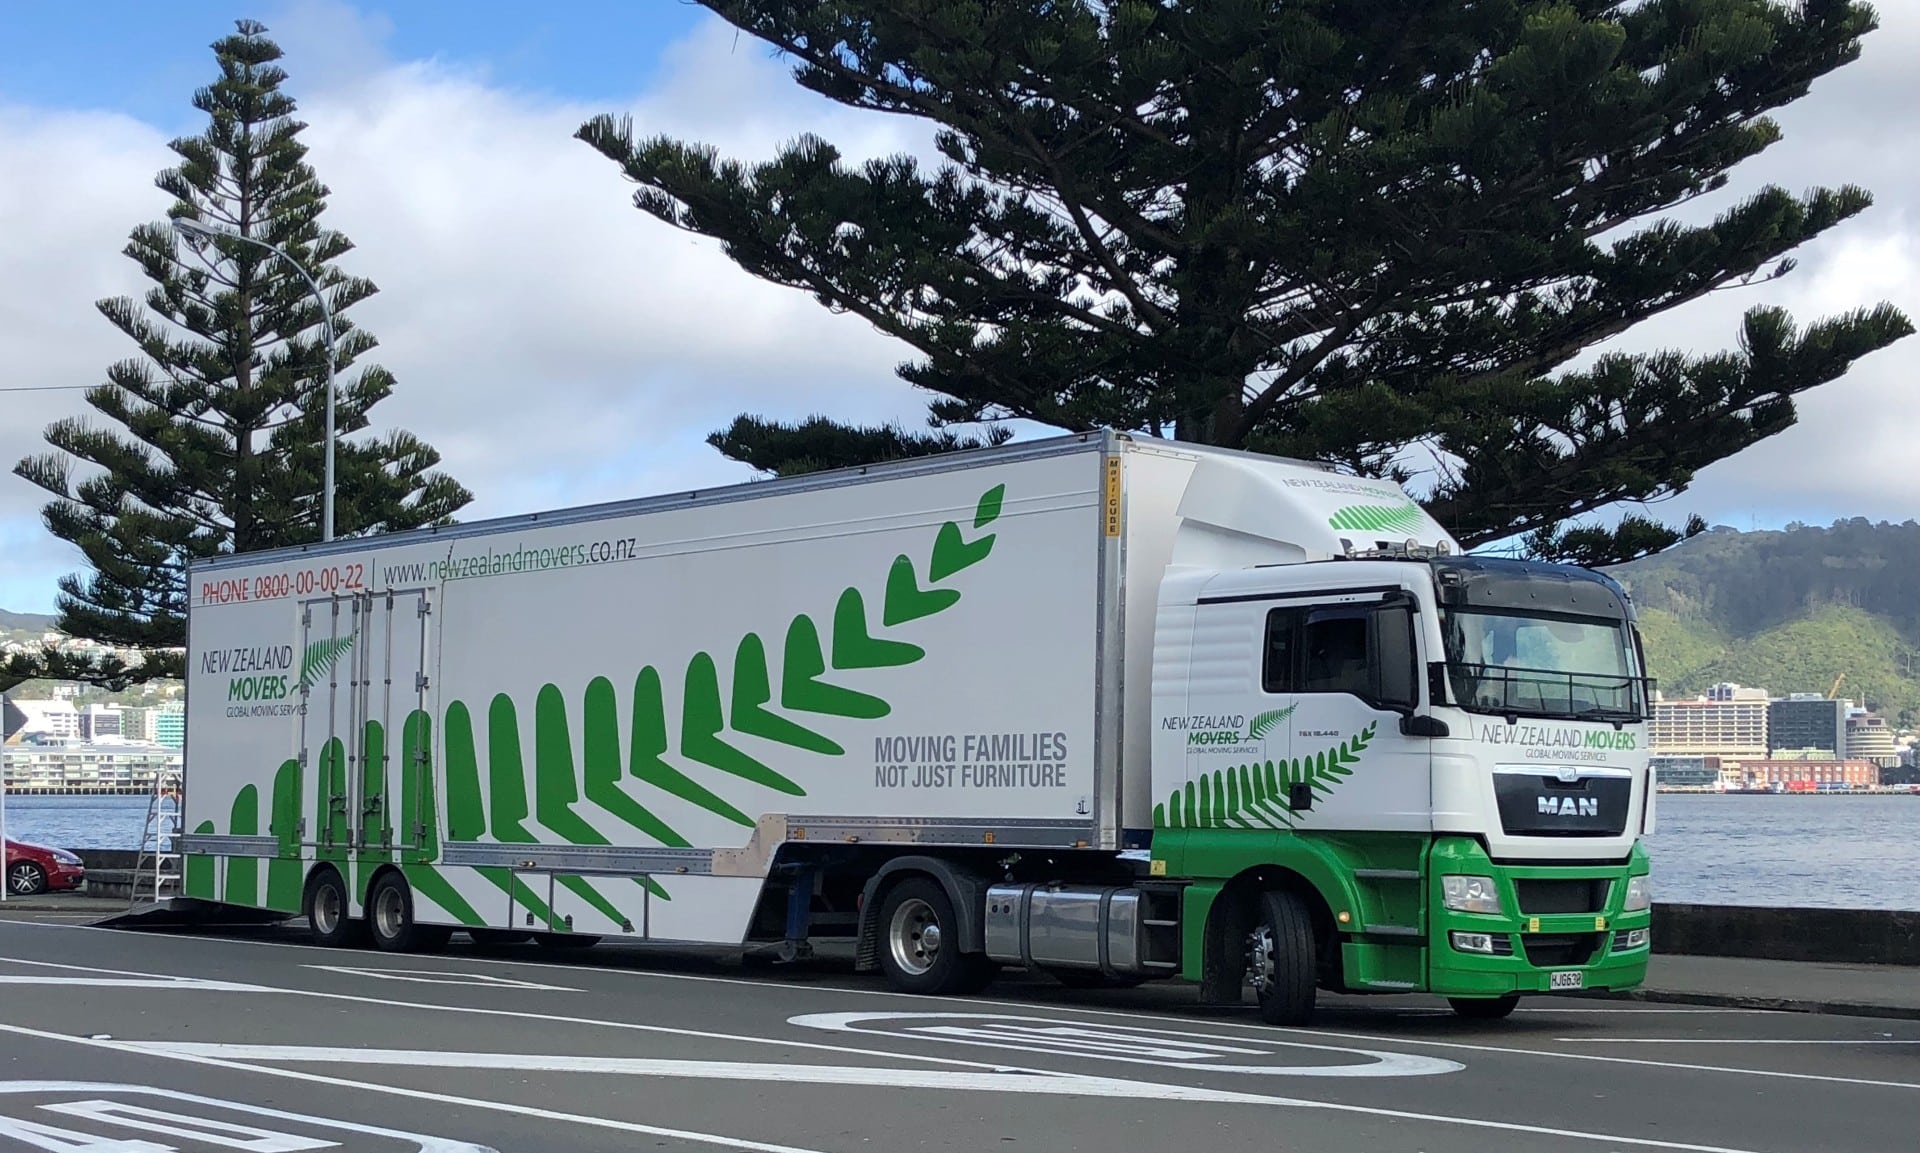 New Zealand Movers Truck | New Zealand Movers